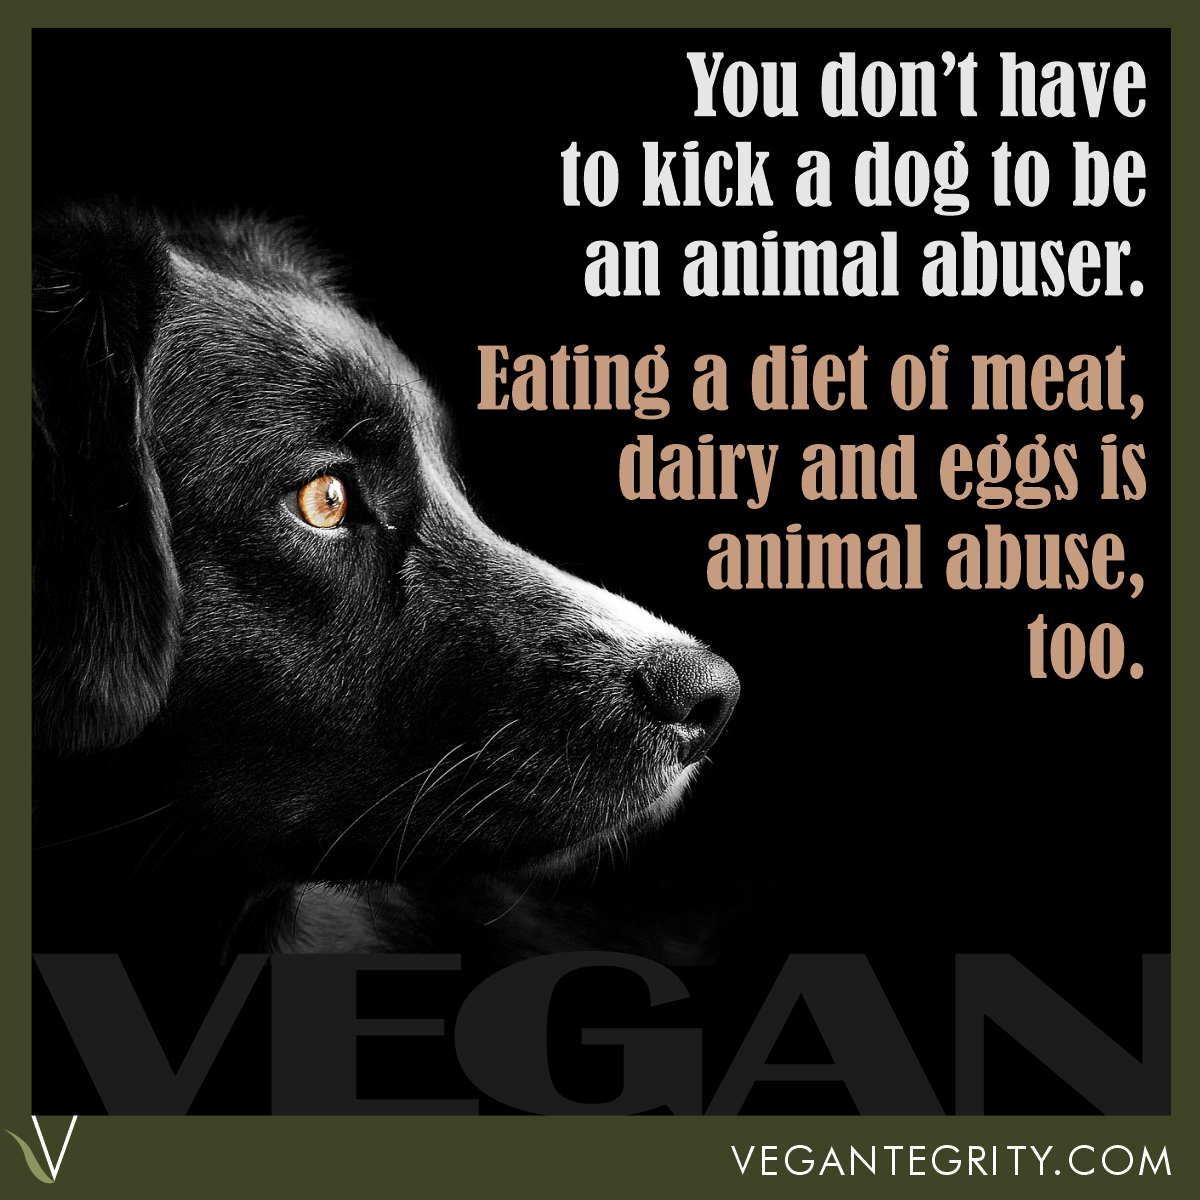 You don't have to kick a dog to be an animal abuser. Eating a diet of meat, dairy and eggs is animal abuse, too.